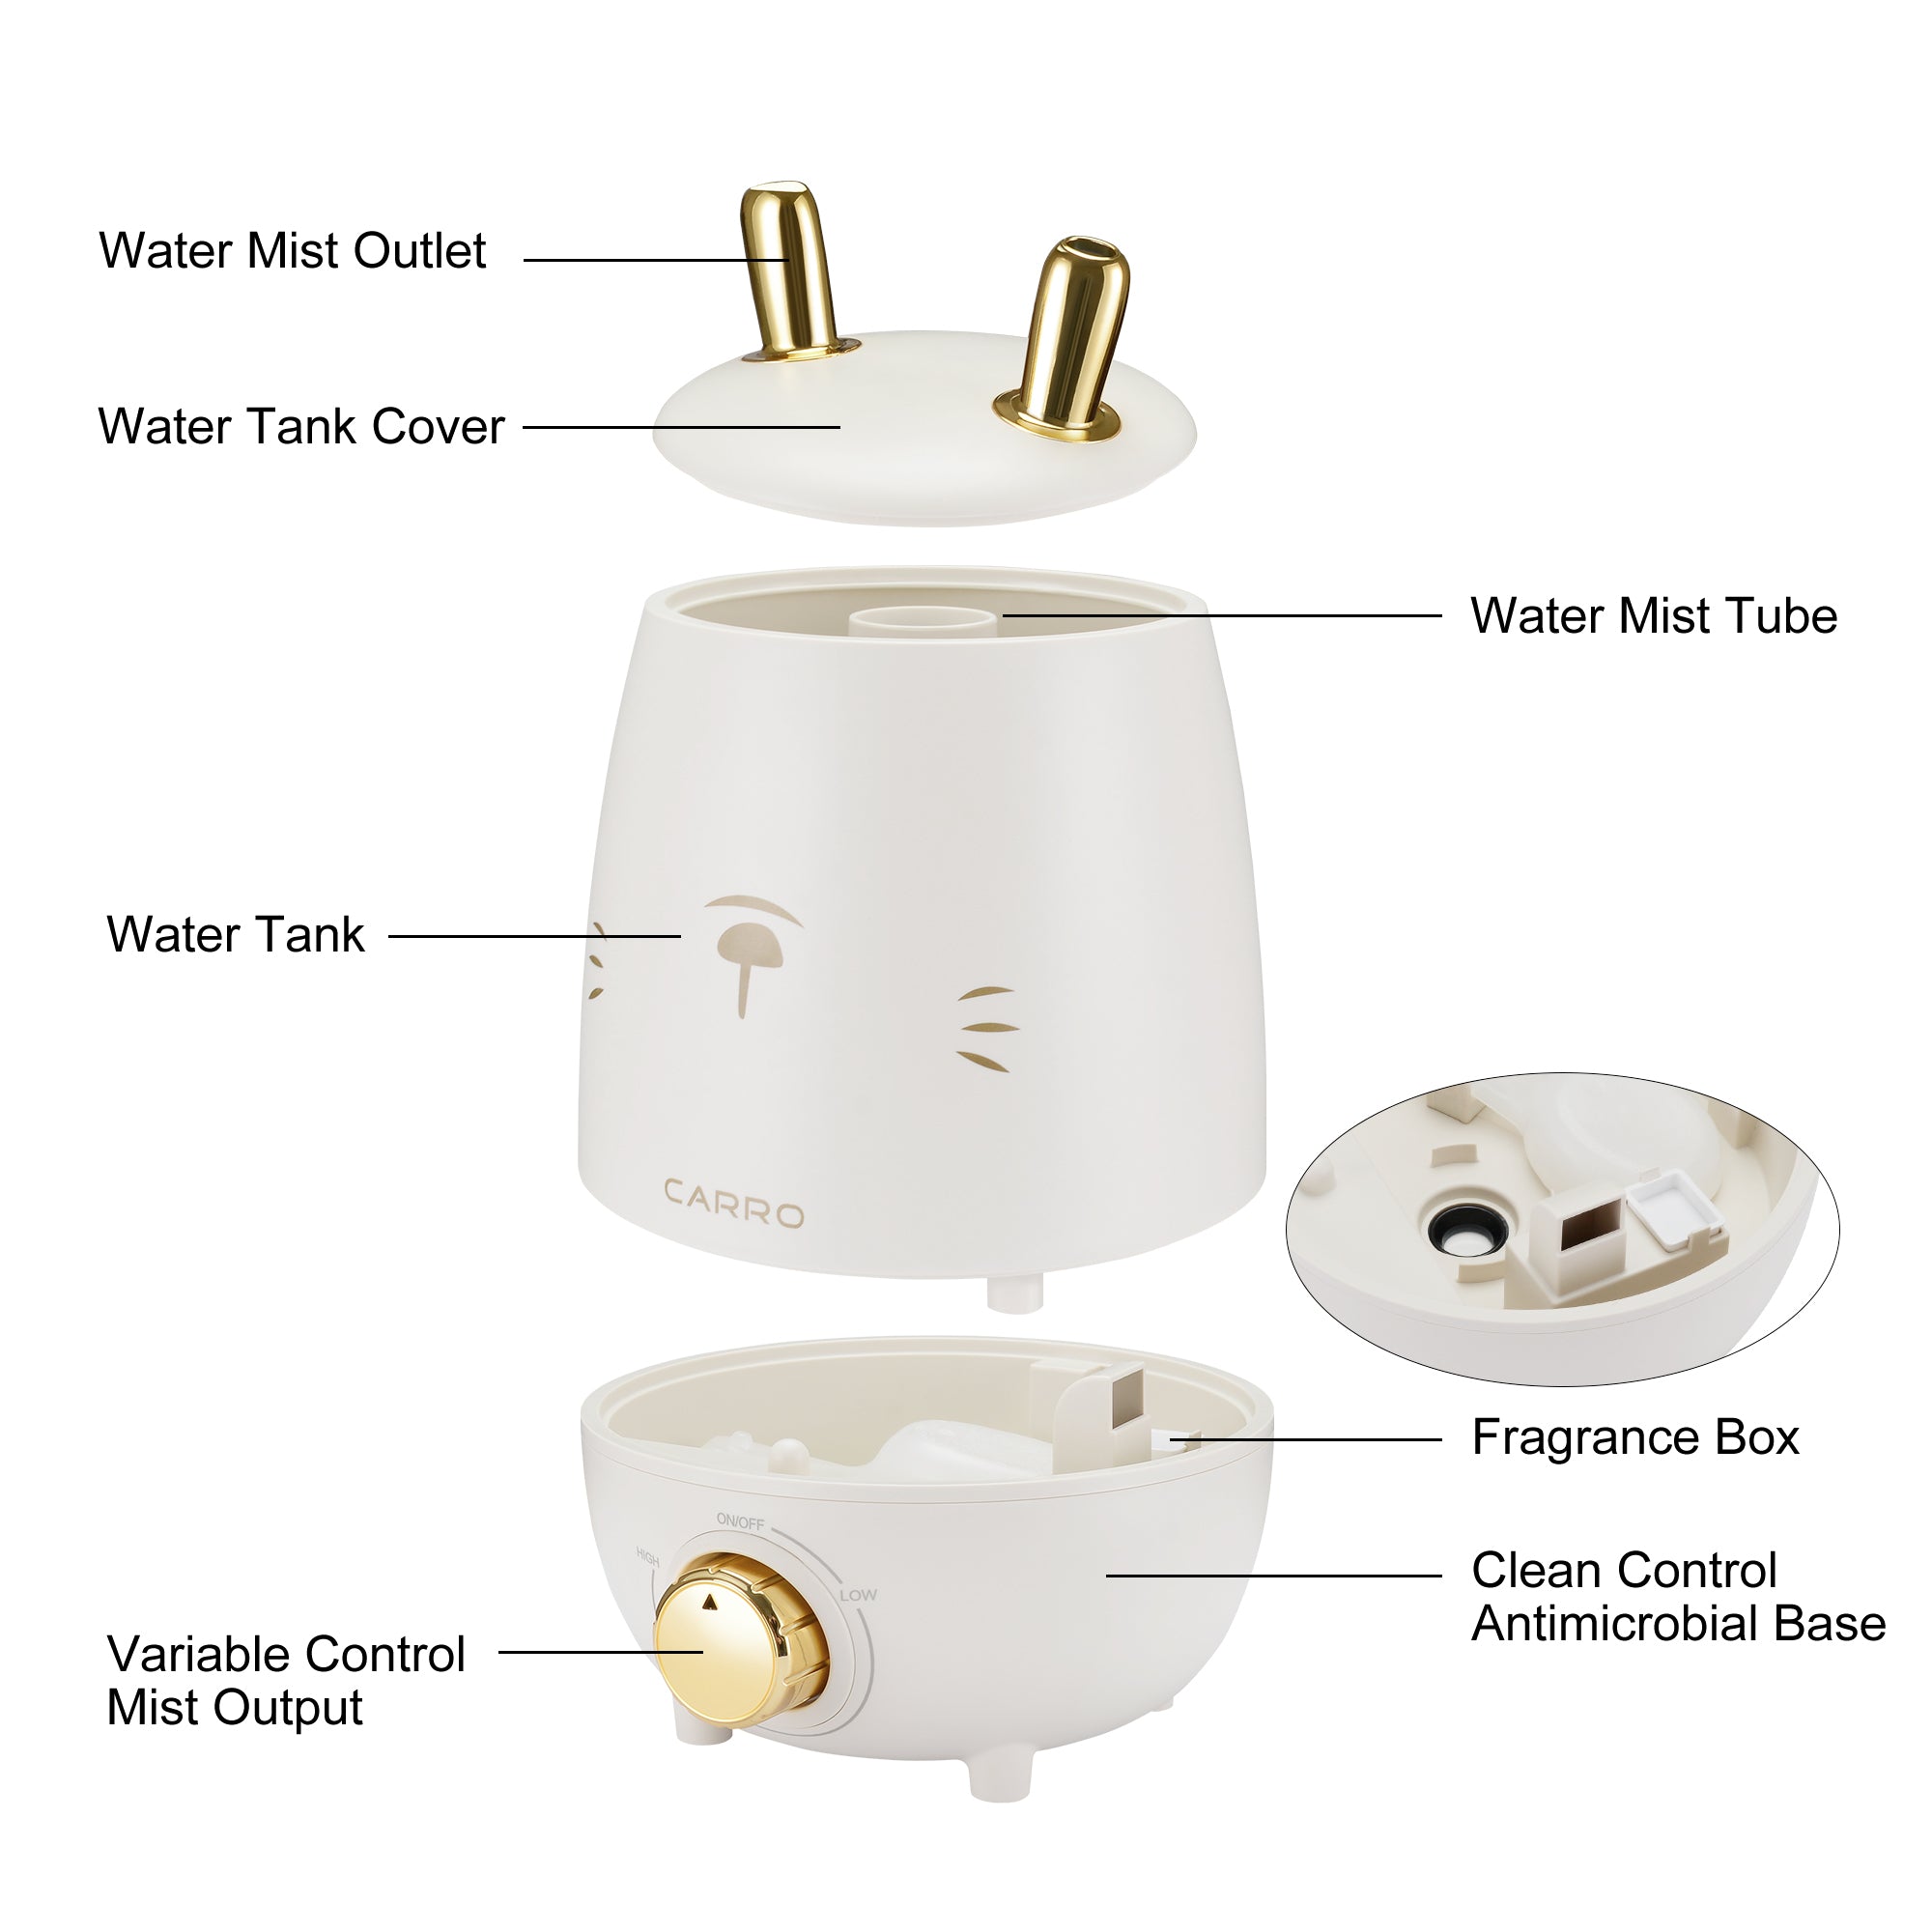 The humidifier is equipped with double lovely bunny-ear-shape Atomization Outlets and variable mist control rotary switch. A low water indicator light lets you know when it's time to refill the water tank. Carro humidifier creates a better home environment for those suffering from colds, allergies and dry skin.